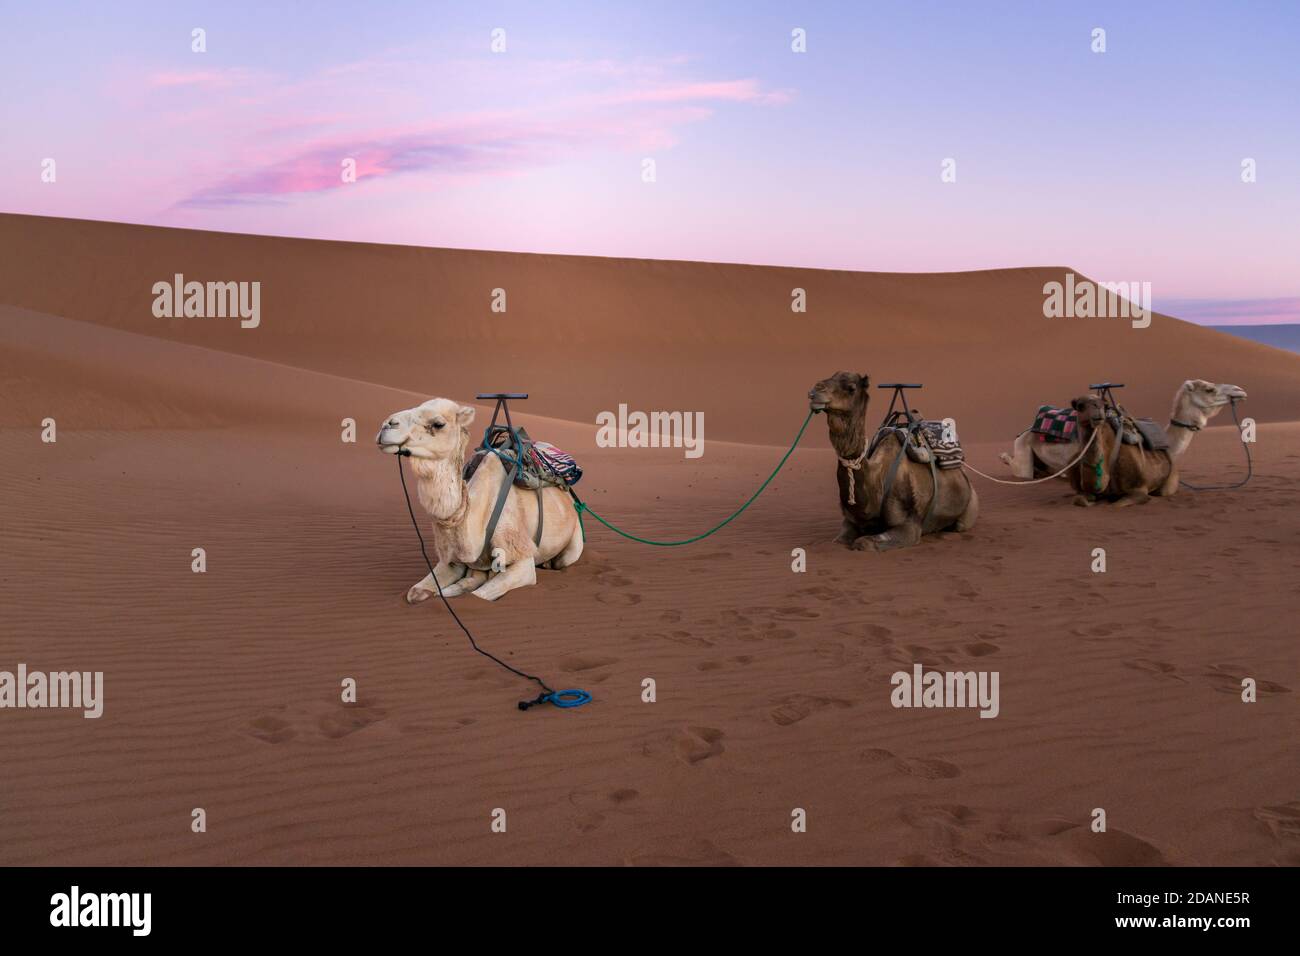 Dromedary group on the desert dune of Erg Chigaga, at the gates of the Sahara, at dawn. Morocco. Concept of travel and adventure. Stock Photo